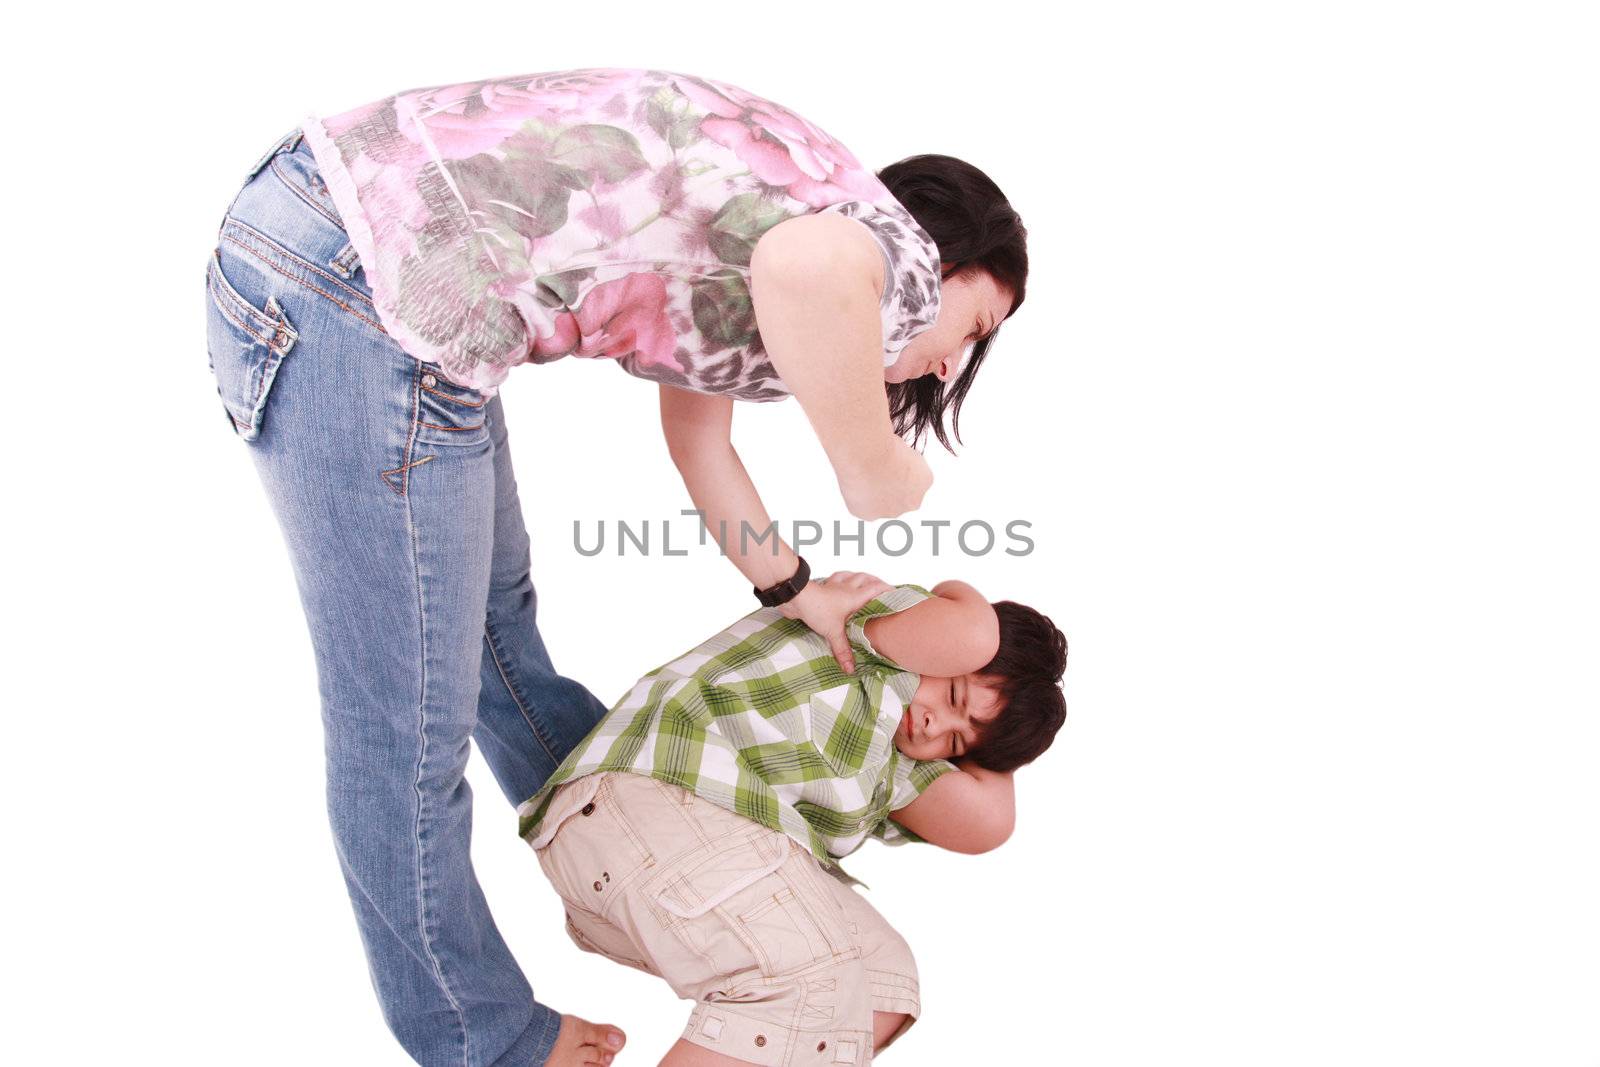 Woman hitting a son who cringes, isolated on white background by dacasdo